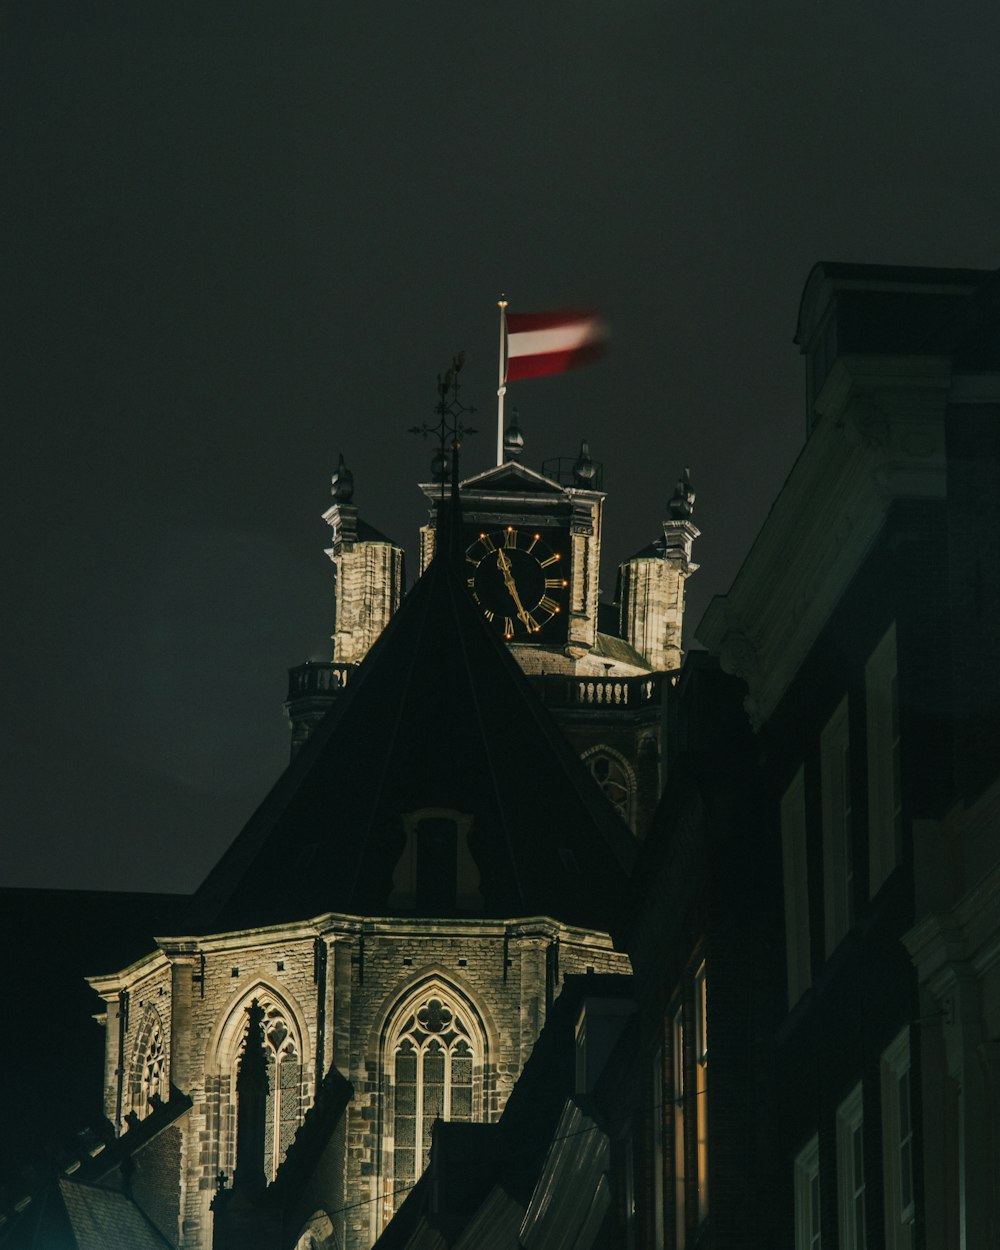 a building with a clock tower at night